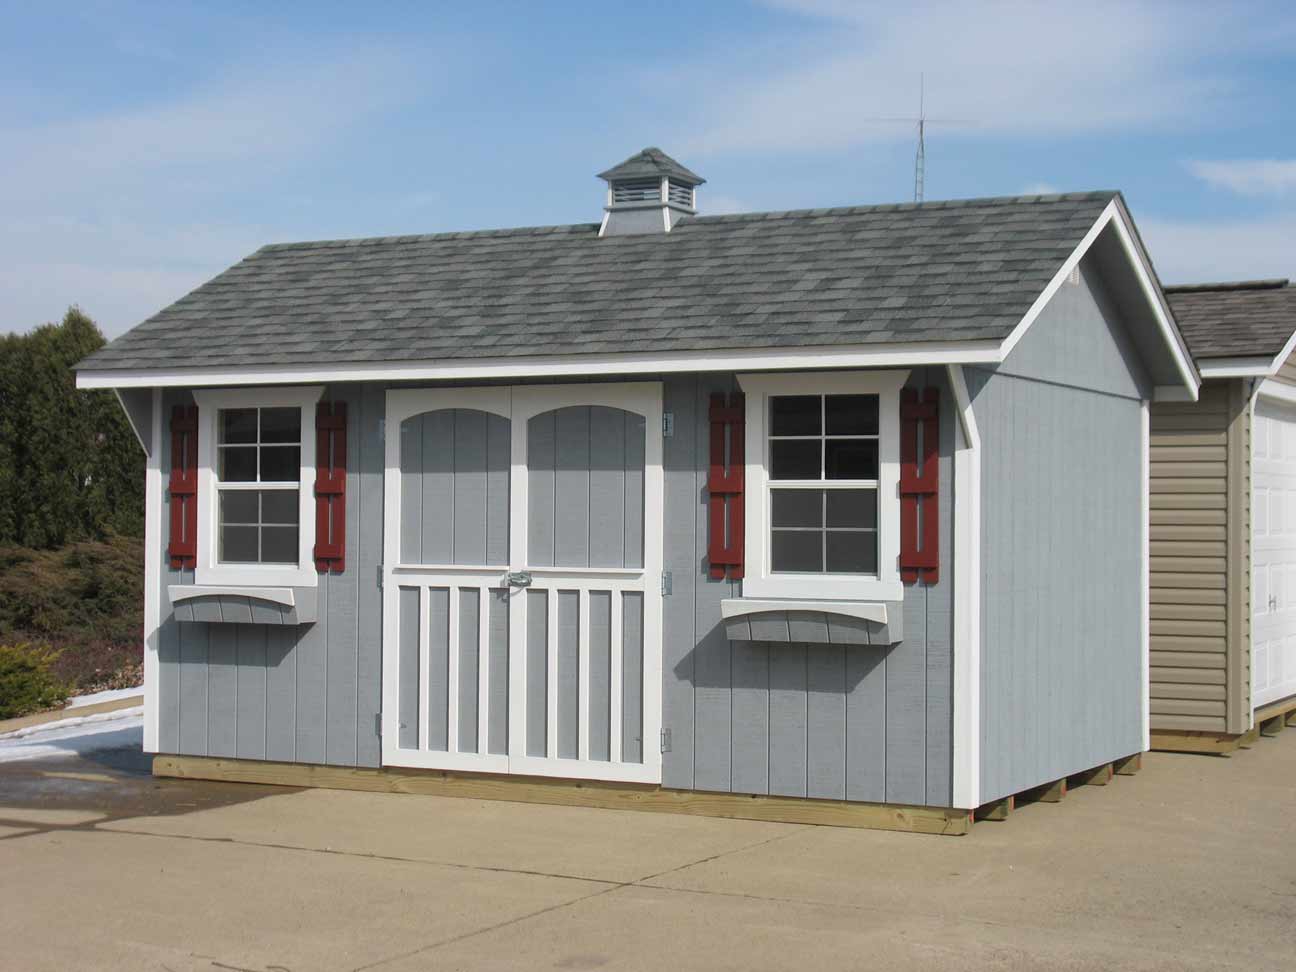  Storage Sheds / Carriage House Storage Shed Pricing &amp; Options List